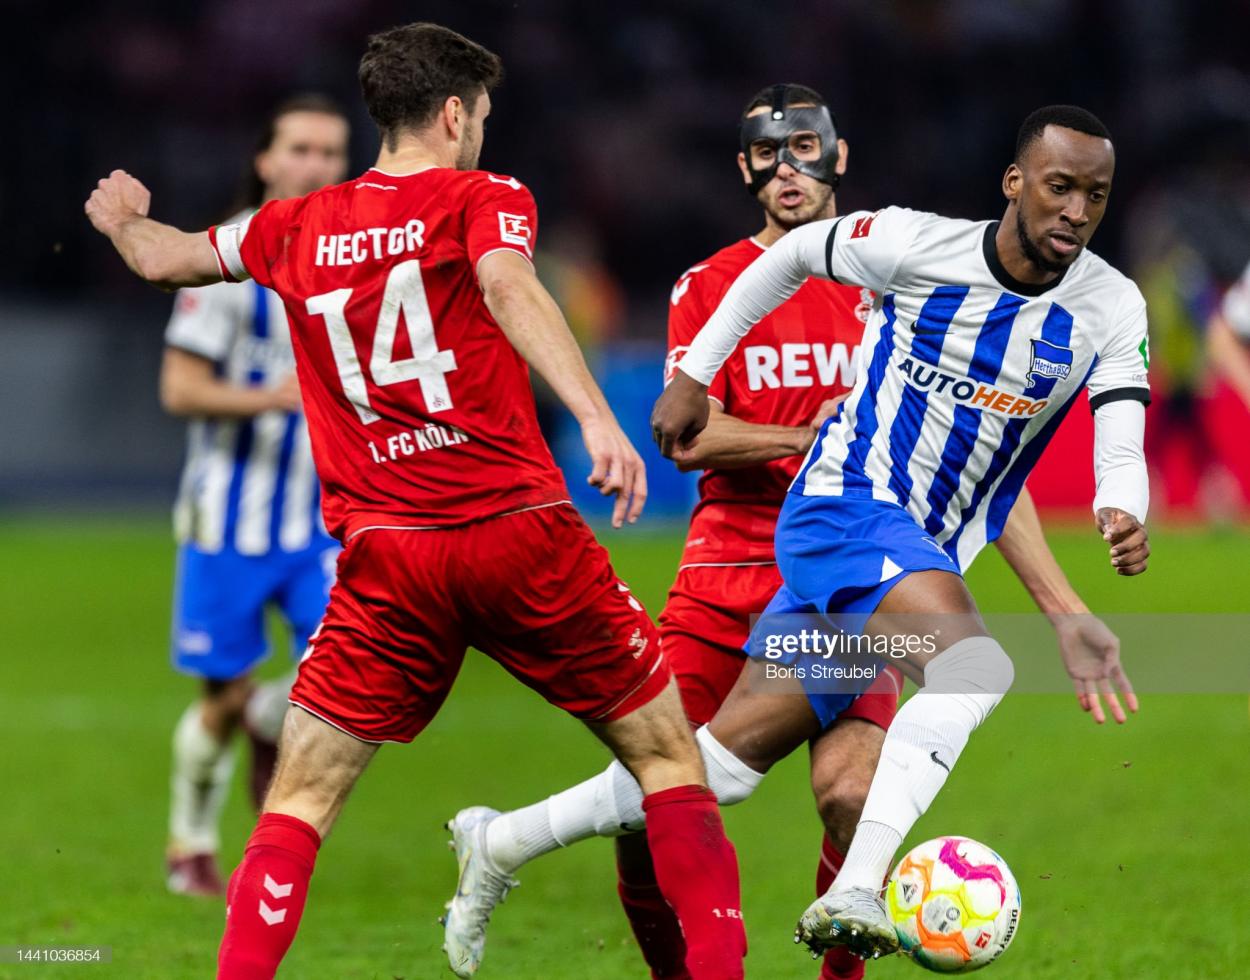 <strong><a  data-cke-saved-href='https://www.vavel.com/en/international-football/2021/08/24/germany-bundesliga/1083433-bayern-munich-vs-hertha-berlin-preview-how-to-watch-kick-off-time-team-news-predicted-lineups-and-ones-to-watch.html' href='https://www.vavel.com/en/international-football/2021/08/24/germany-bundesliga/1083433-bayern-munich-vs-hertha-berlin-preview-how-to-watch-kick-off-time-team-news-predicted-lineups-and-ones-to-watch.html'>Dodi Lukebakio</a></strong> has seven goals to his name this season and is key to Hertha remaining in the Bundesliga. PHOTO CREDIT:Boris Streubel